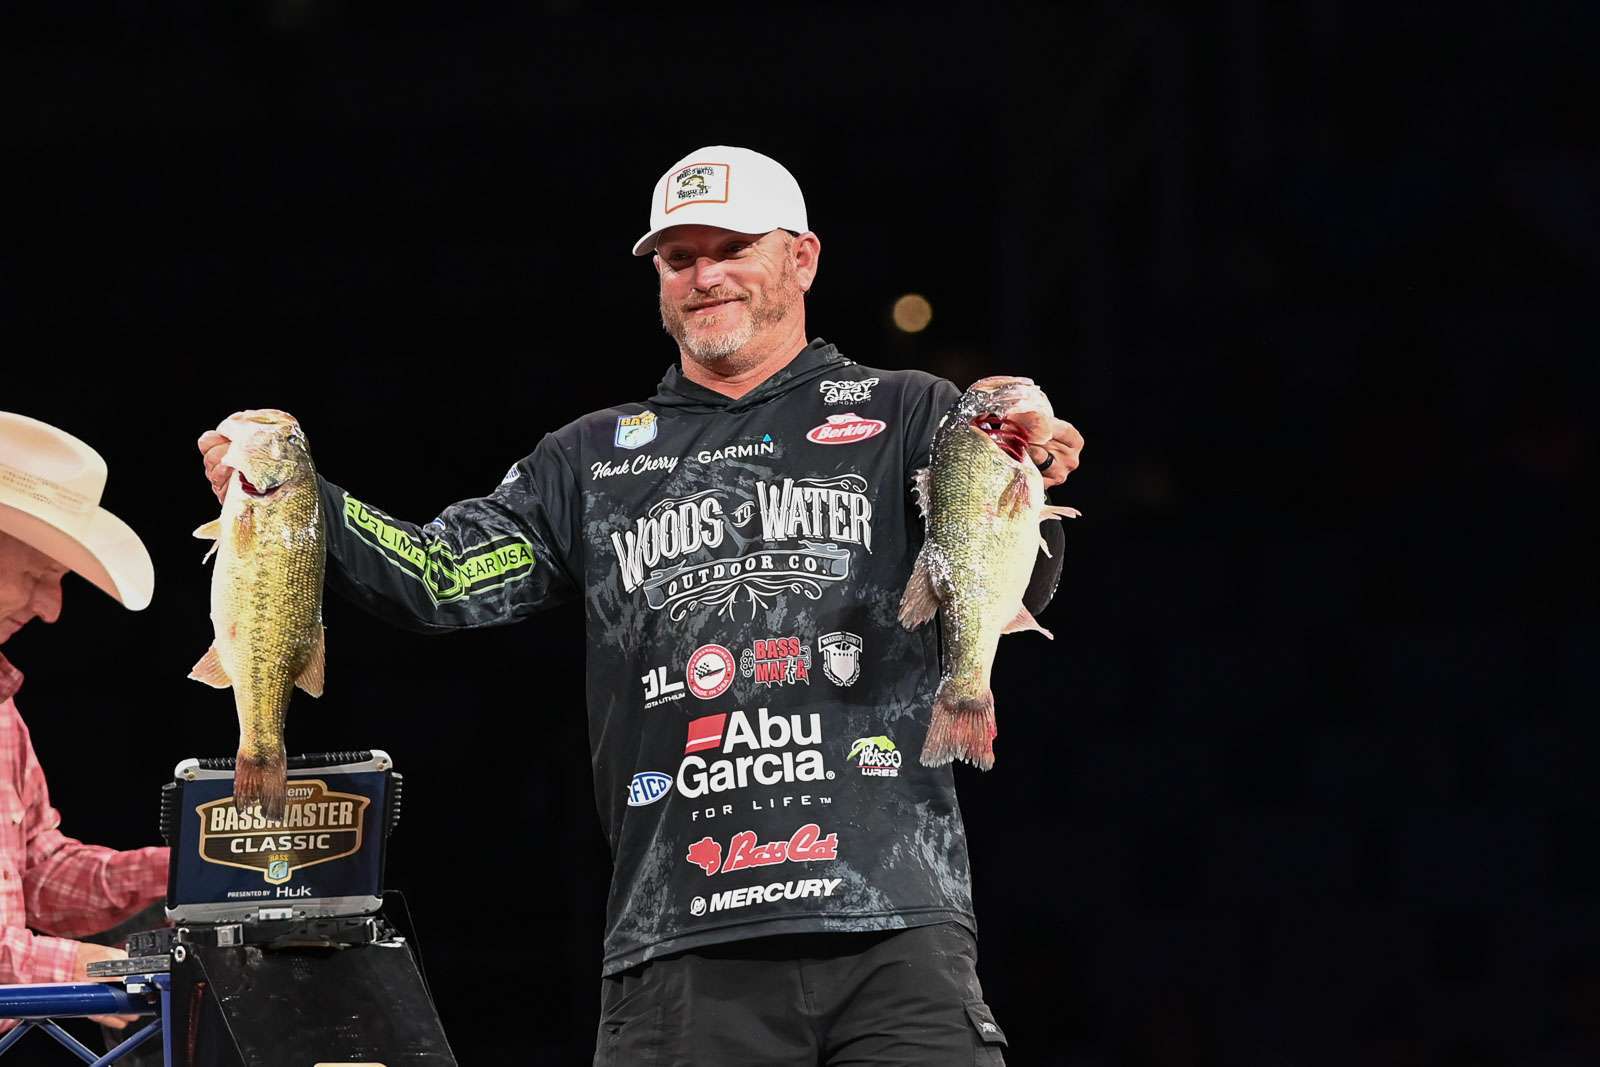 Cherry took the lead early on Day 2 with a 4-12 and 6-0. His bag of 17-10 gave him 37-14 and a lead of 4-12 heading into Championship Sunday. In winning last yearâs Classic on Lake Guntersville, Cherry led by 4-13 then won by 6-11.